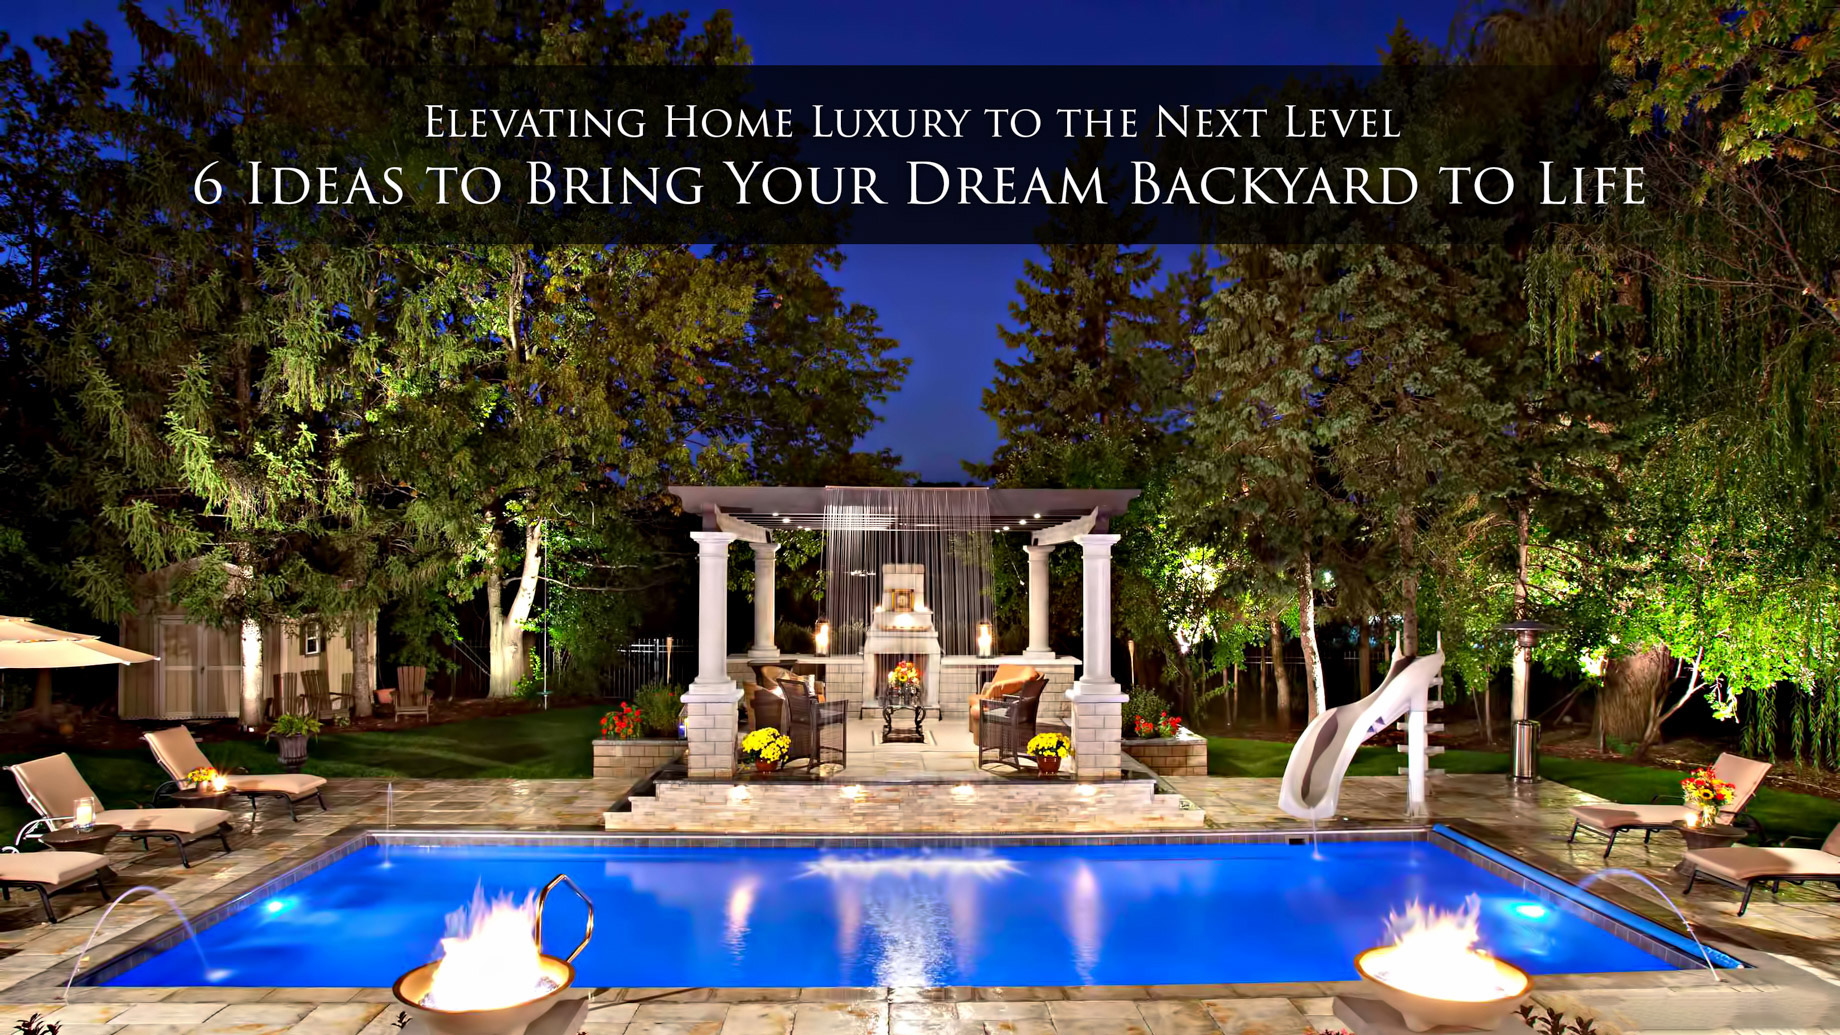 Elevating Home Luxury to the Next Level - 6 Ideas to Bring Your Dream Backyard to Life